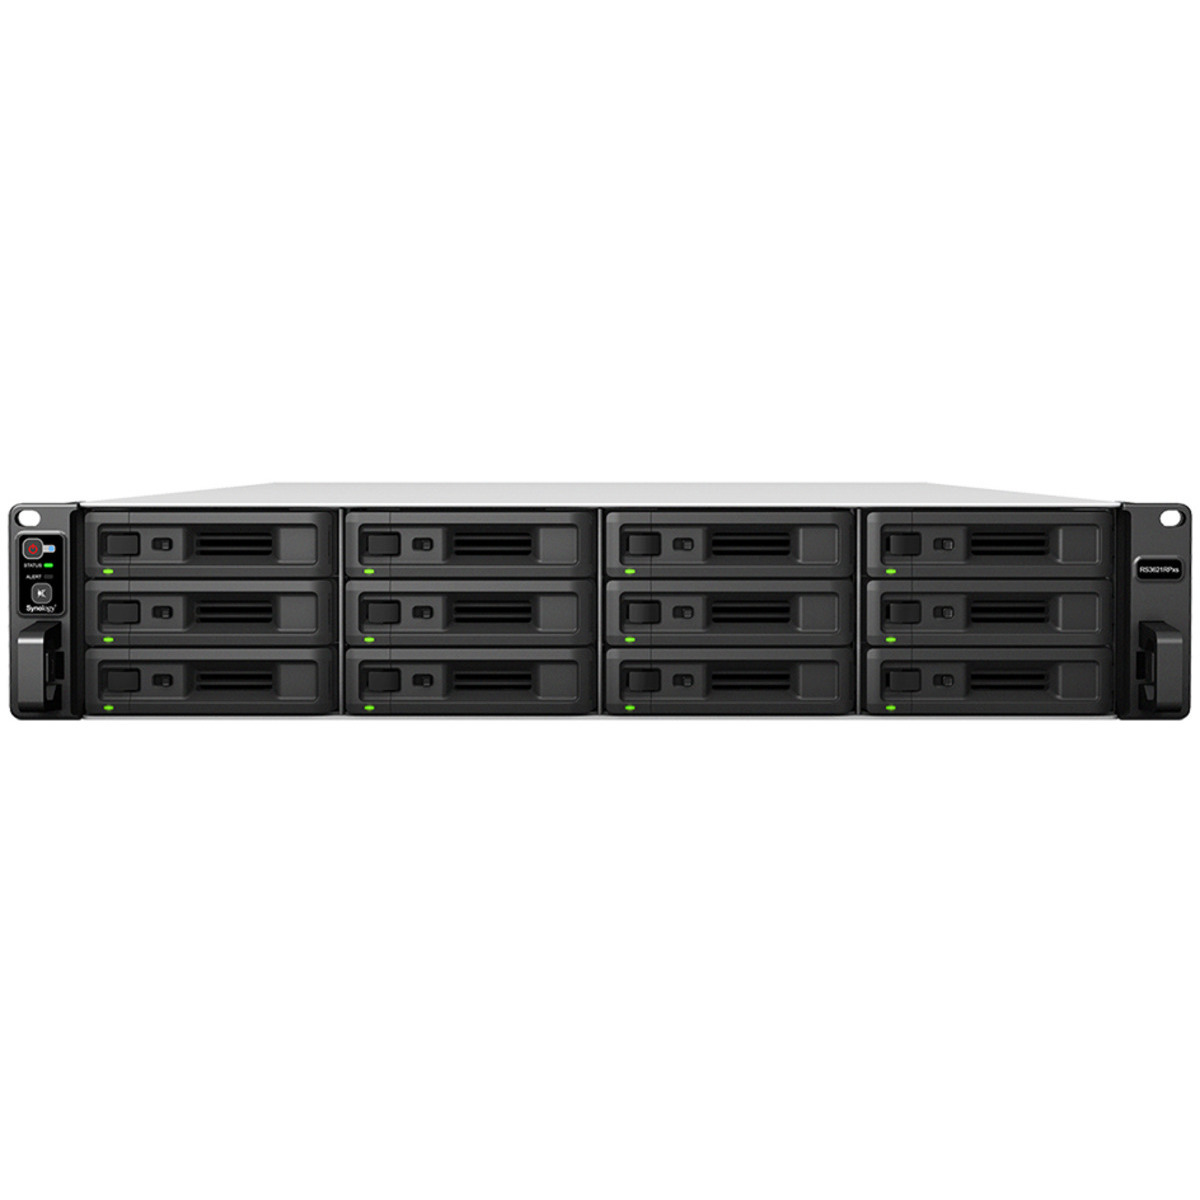 Synology RackStation RS3621RPxs 80tb 12-Bay RackMount Large Business / Enterprise NAS - Network Attached Storage Device 8x10tb Western Digital Ultrastar DC HC330 WUS721010ALE6L4 3.5 7200rpm SATA 6Gb/s HDD ENTERPRISE Class Drives Installed - Burn-In Tested RackStation RS3621RPxs